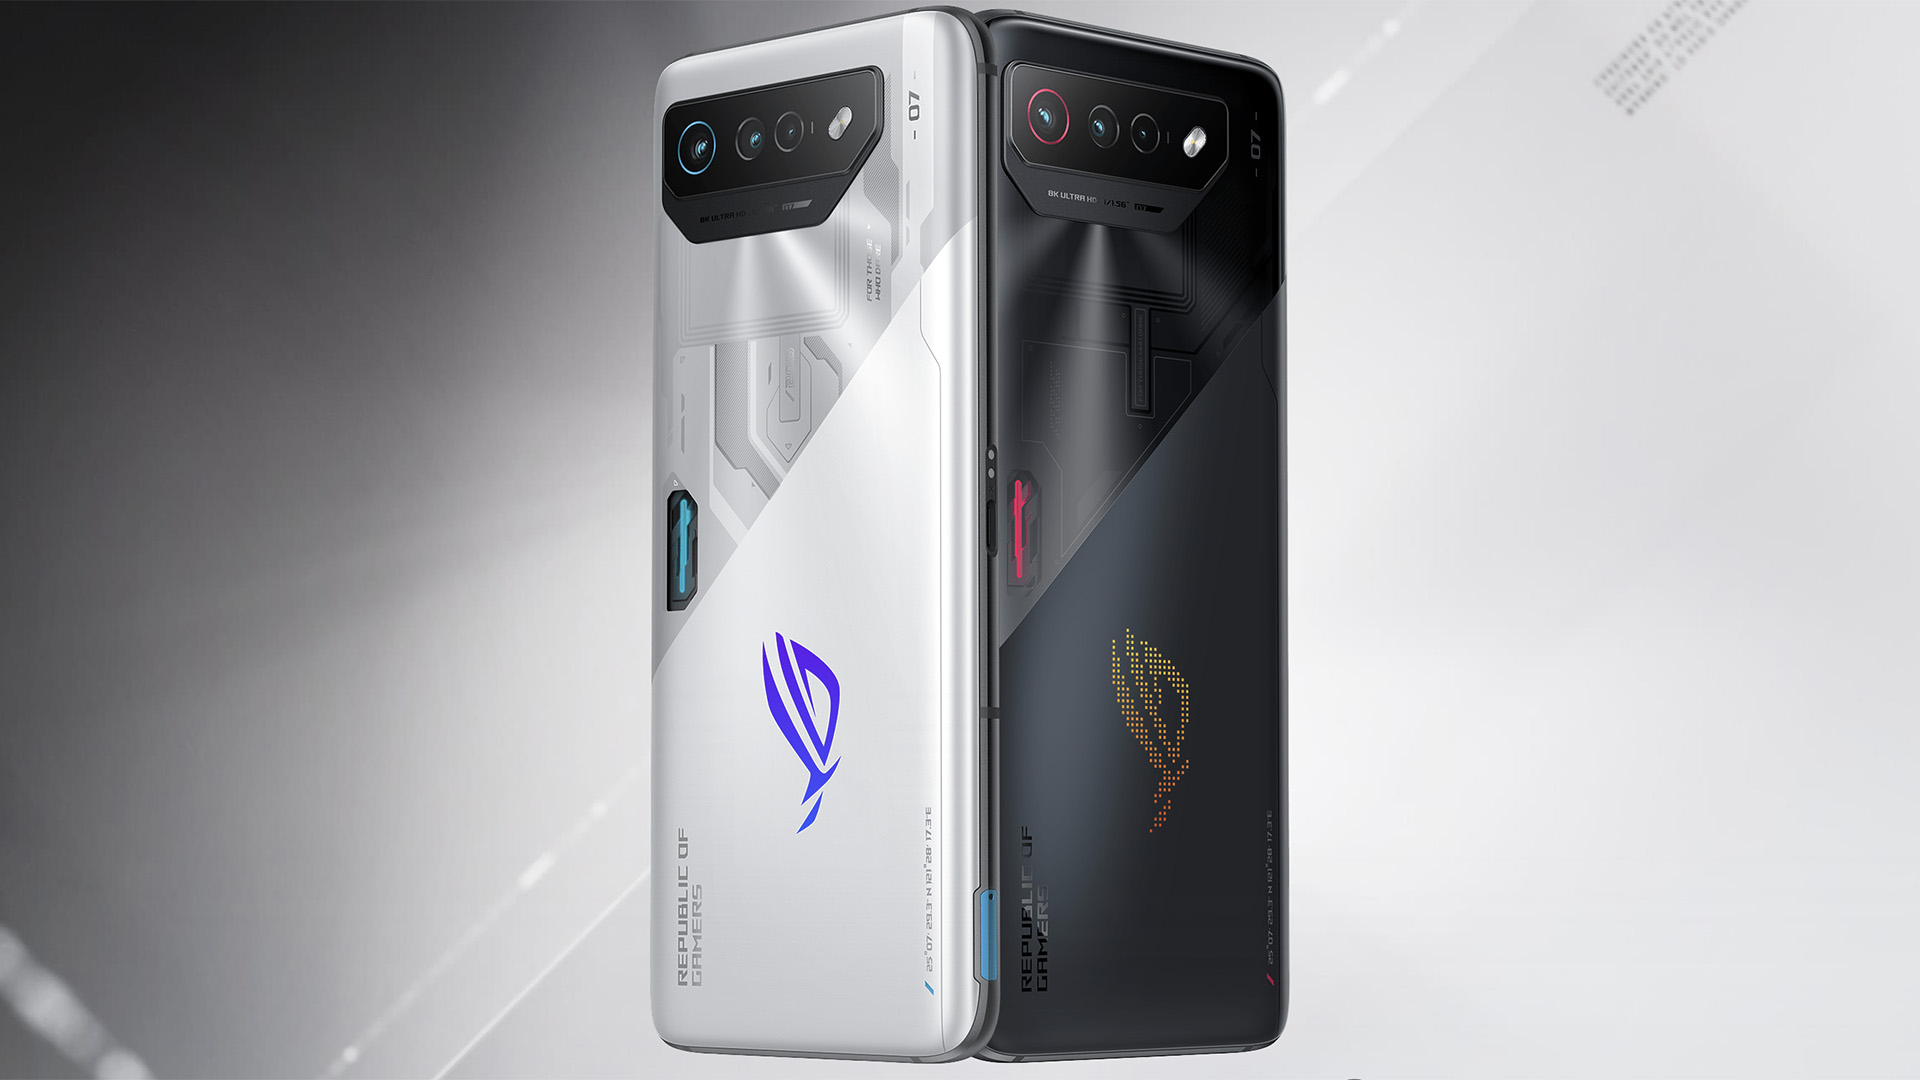 New Renders Give Us a Look at the Asus ROG Phone 8, Launch Date Confirmed